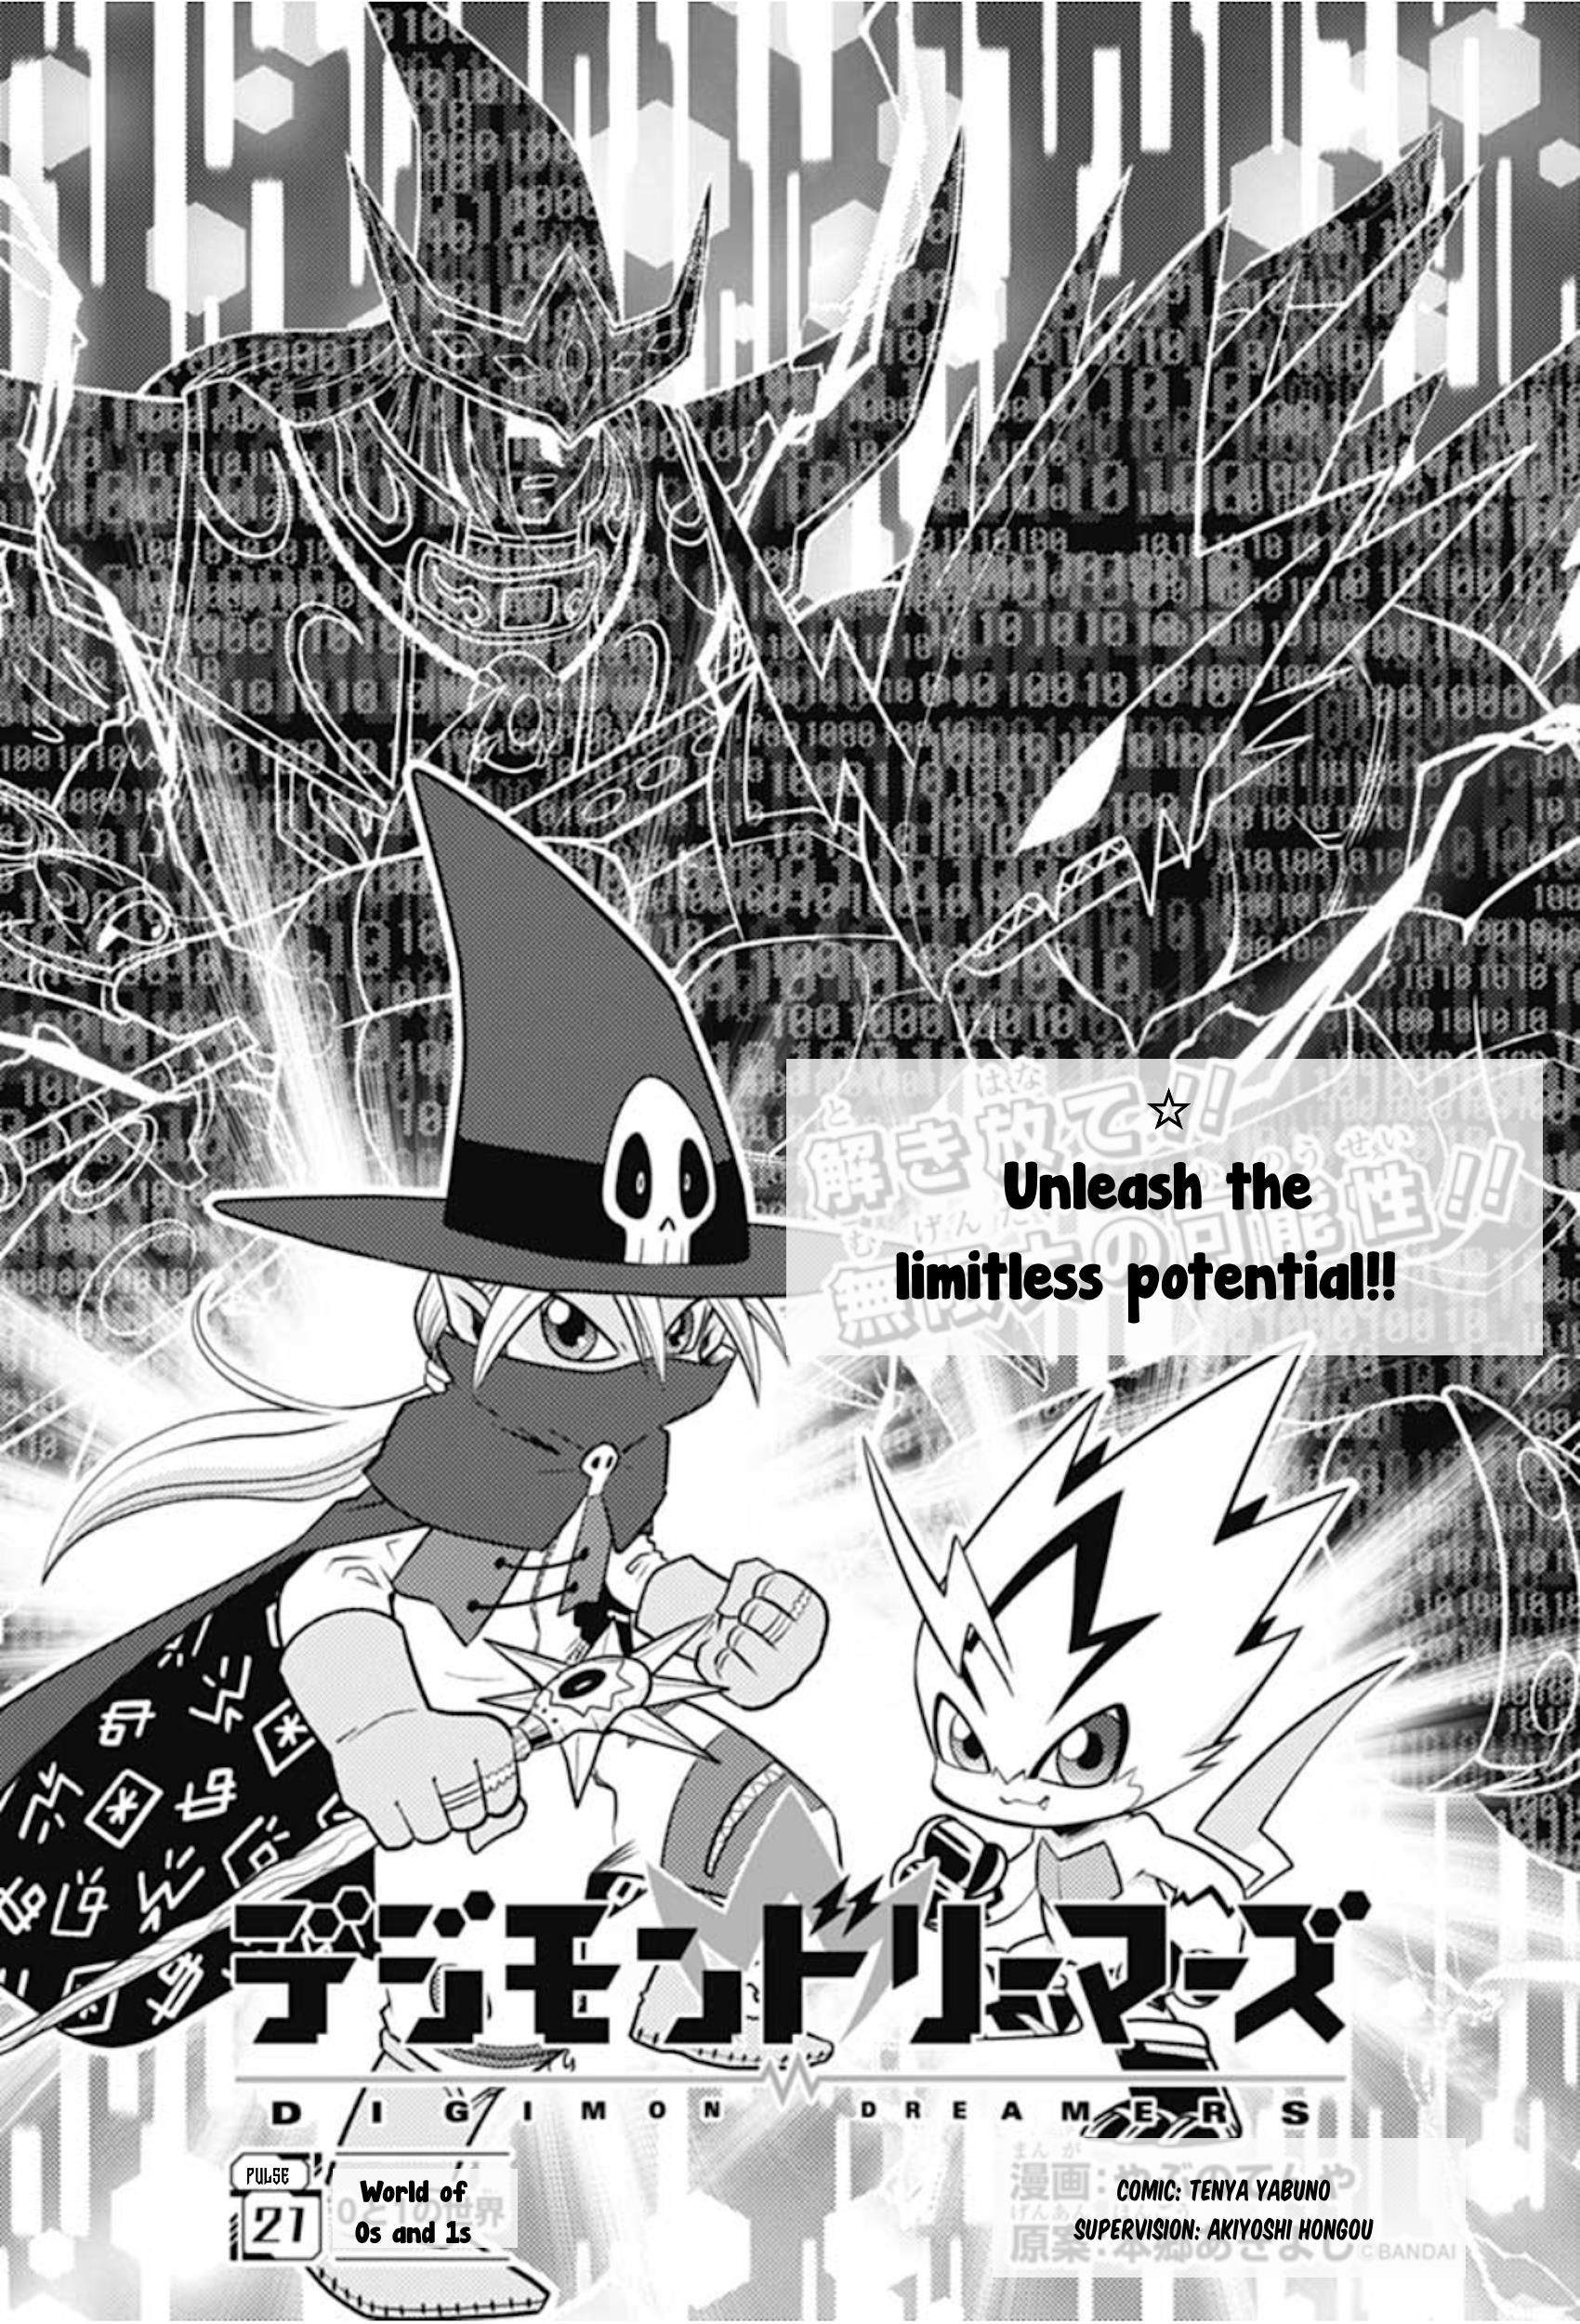 Digimon Dreamers Vol.2 Chapter 21: World Of 0S And 1S - Picture 3